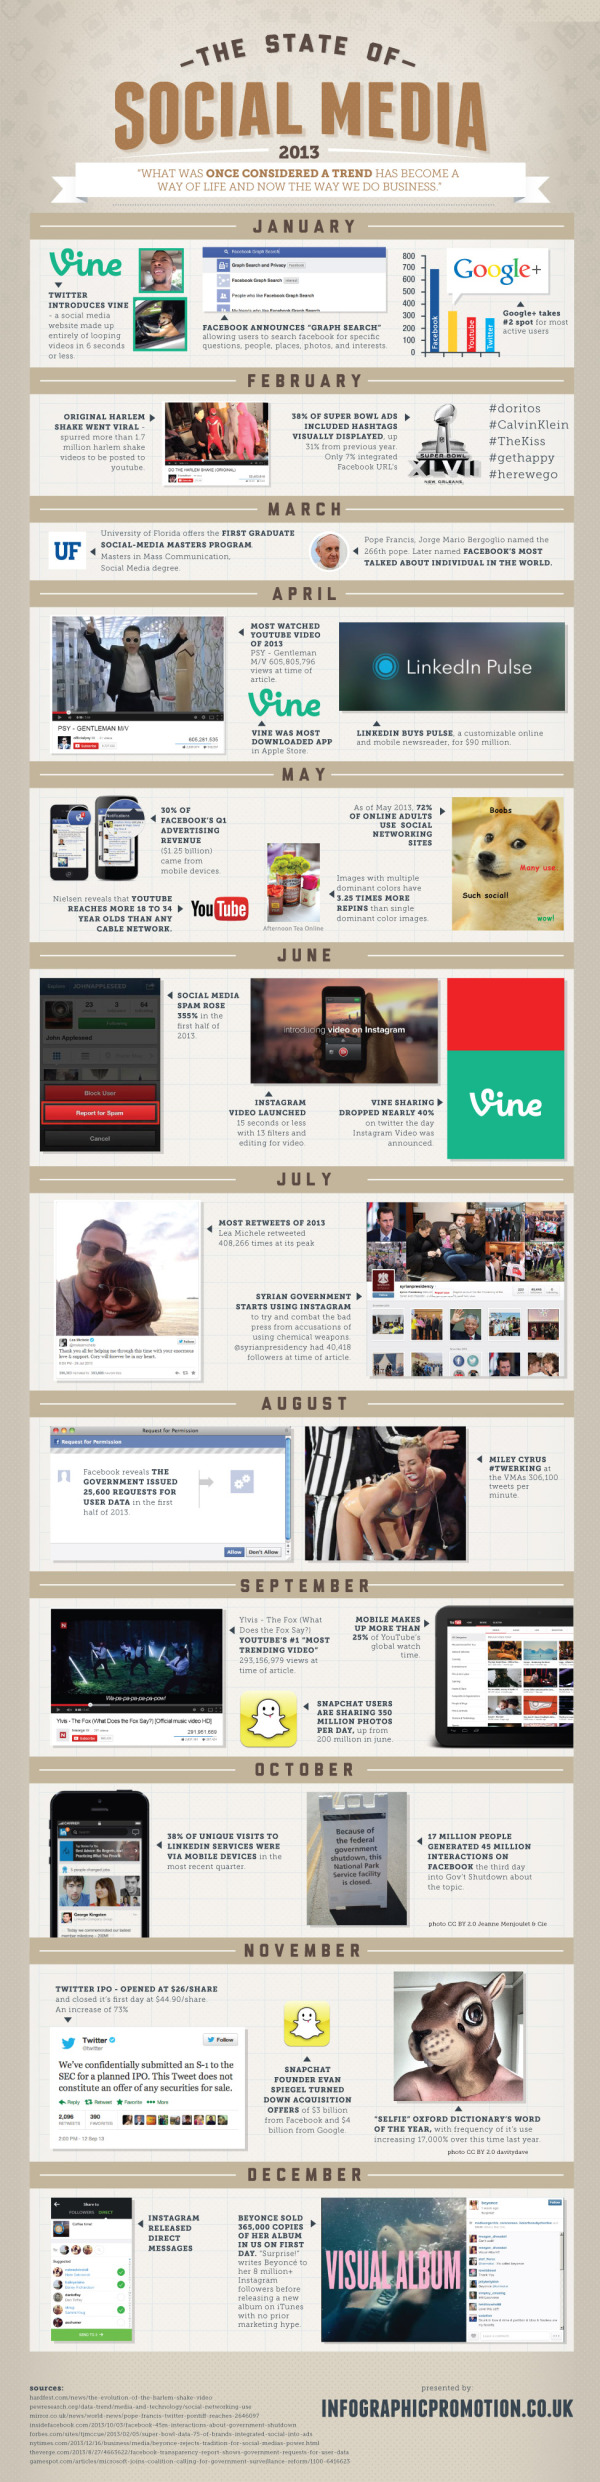 The State of Social Media 2013 infographic